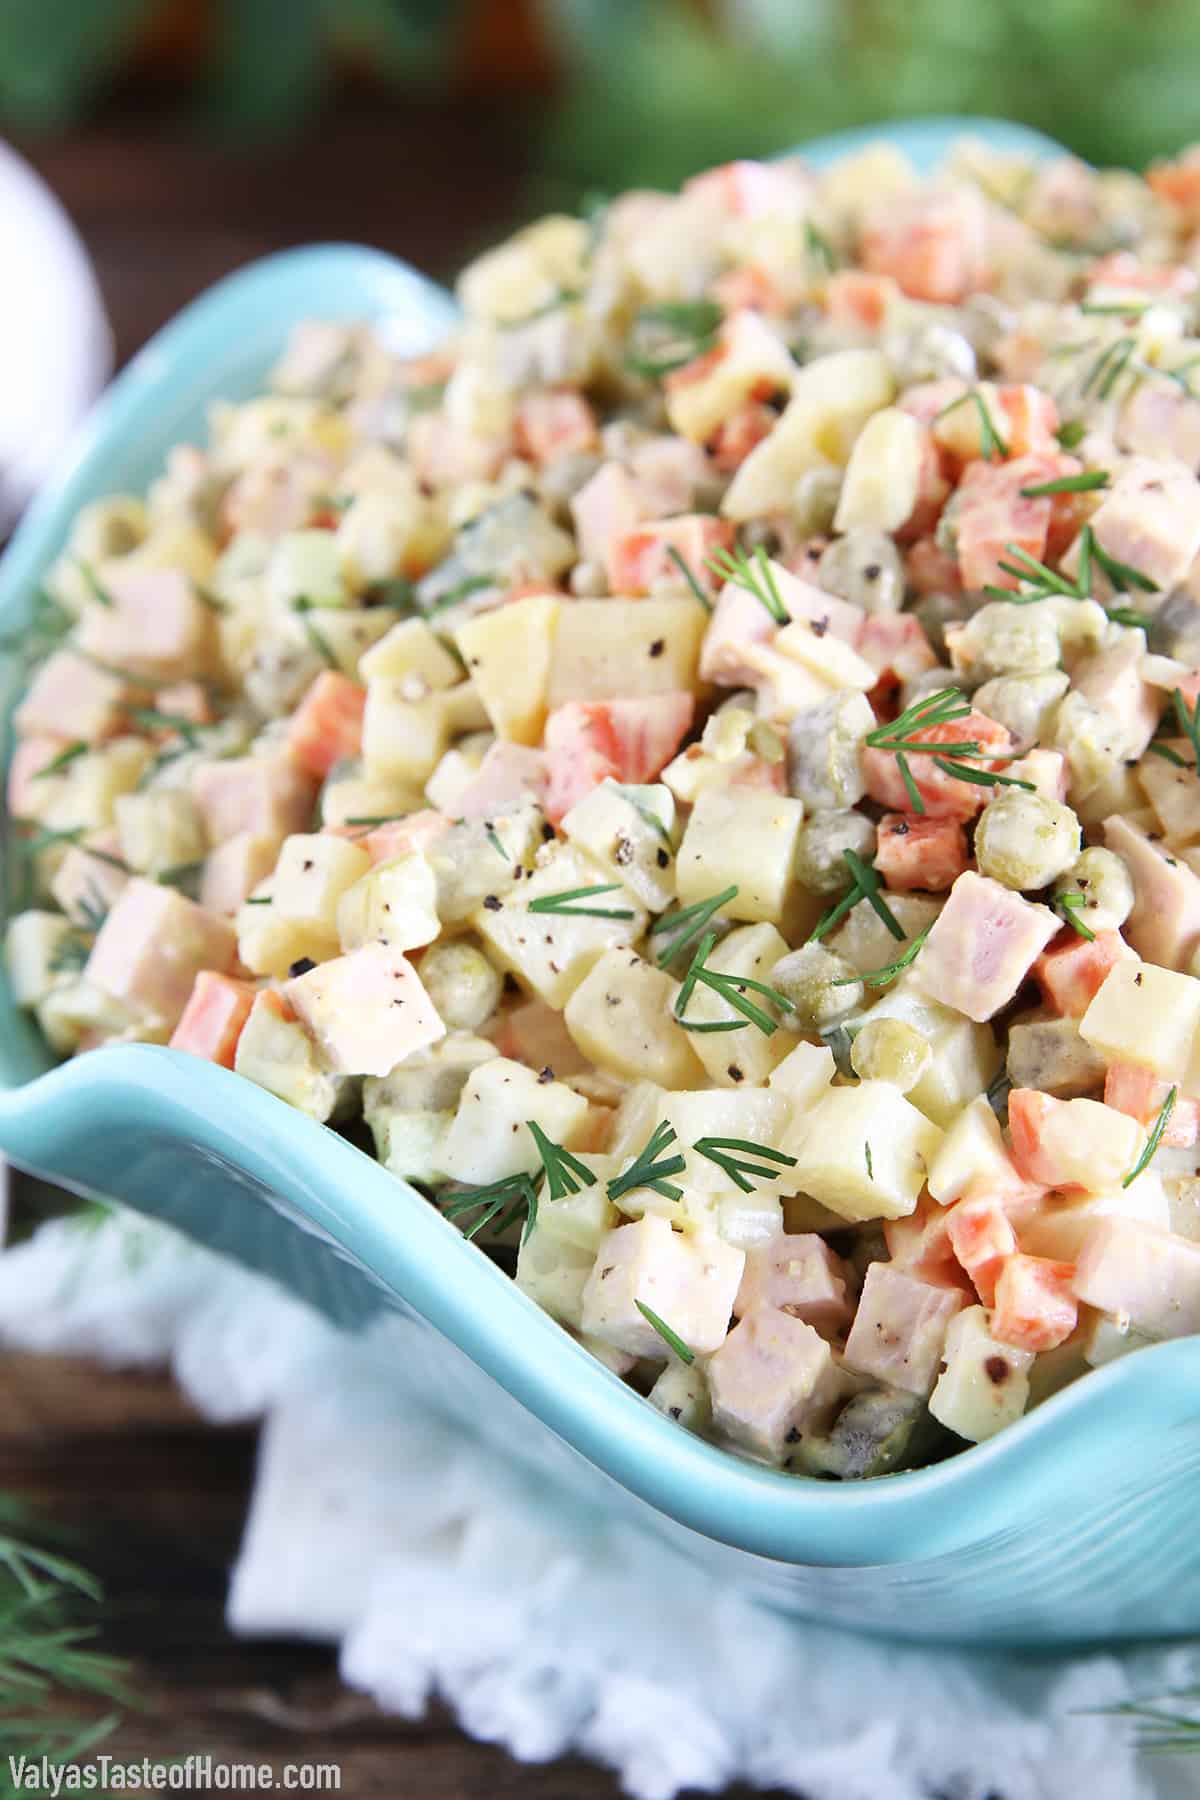 A traditional potato salad is that creamy, deliciousness in a salad that we’ve come to love and adore! It’s a homemade potato salad made with potatoes that have been boiled and mixed with a creamy mayo-based potato salad dressing.